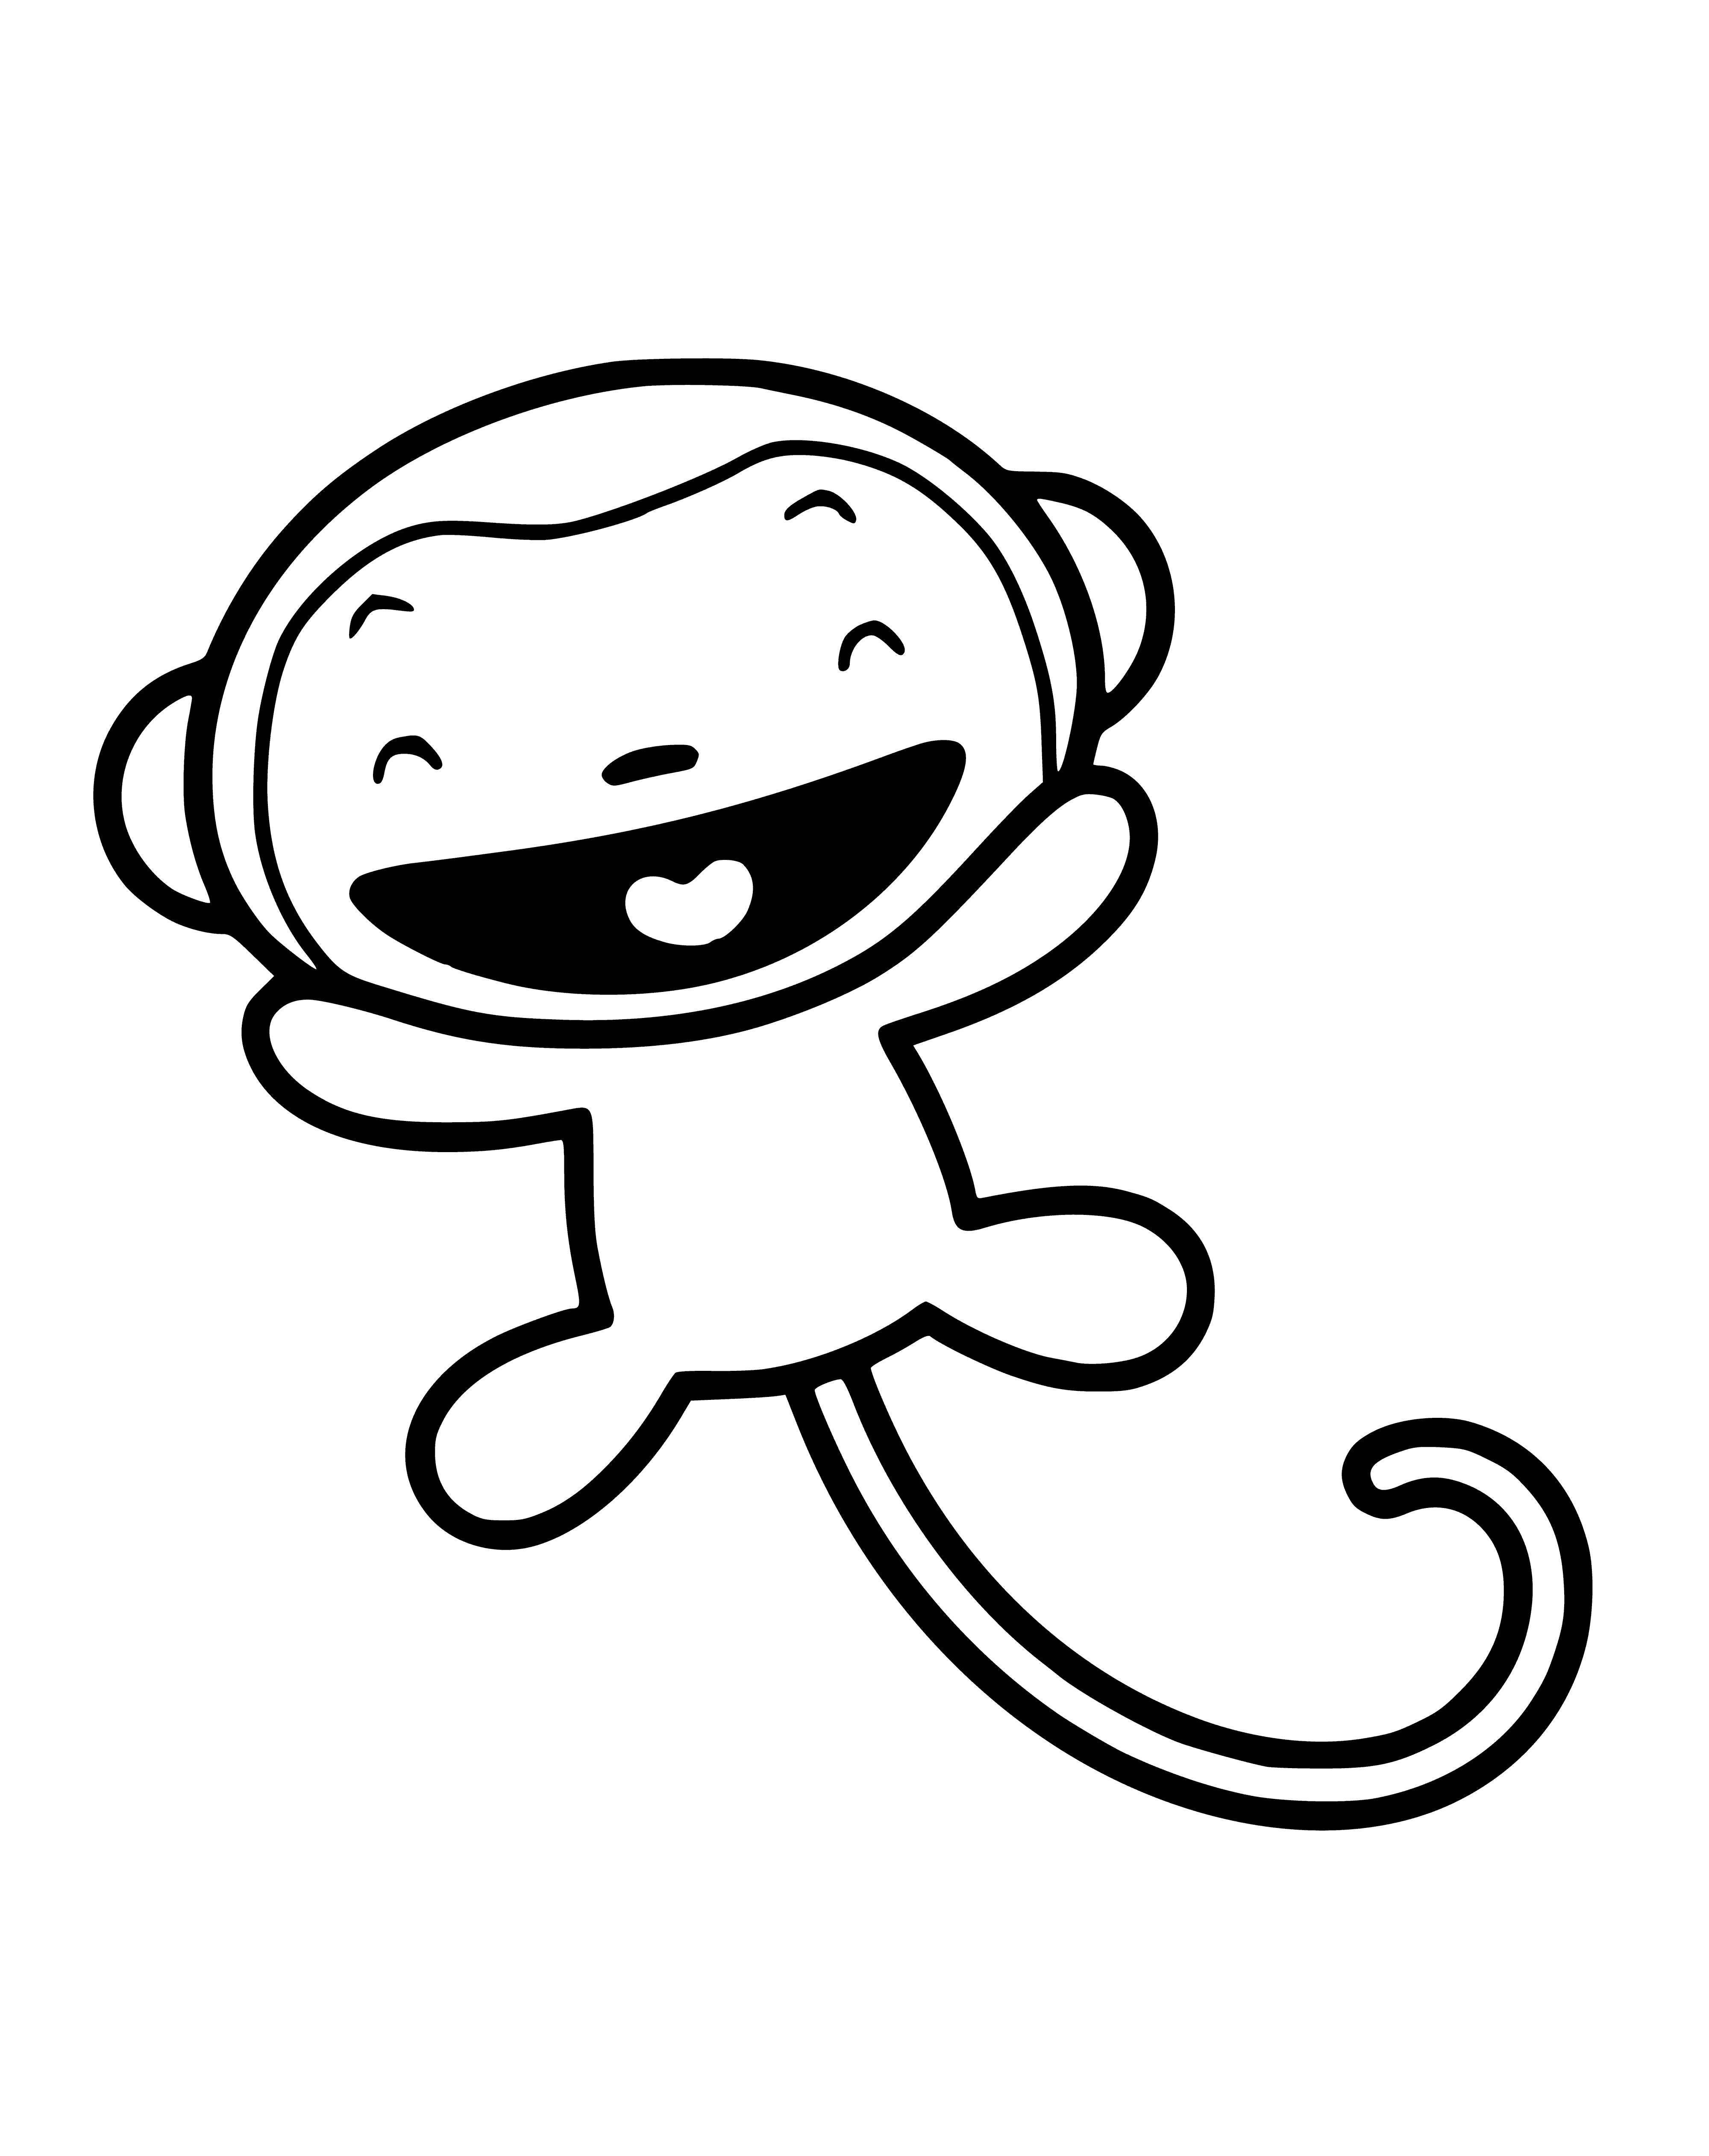 coloring page: Monkeys laugh at odd things, making them fun to watch.